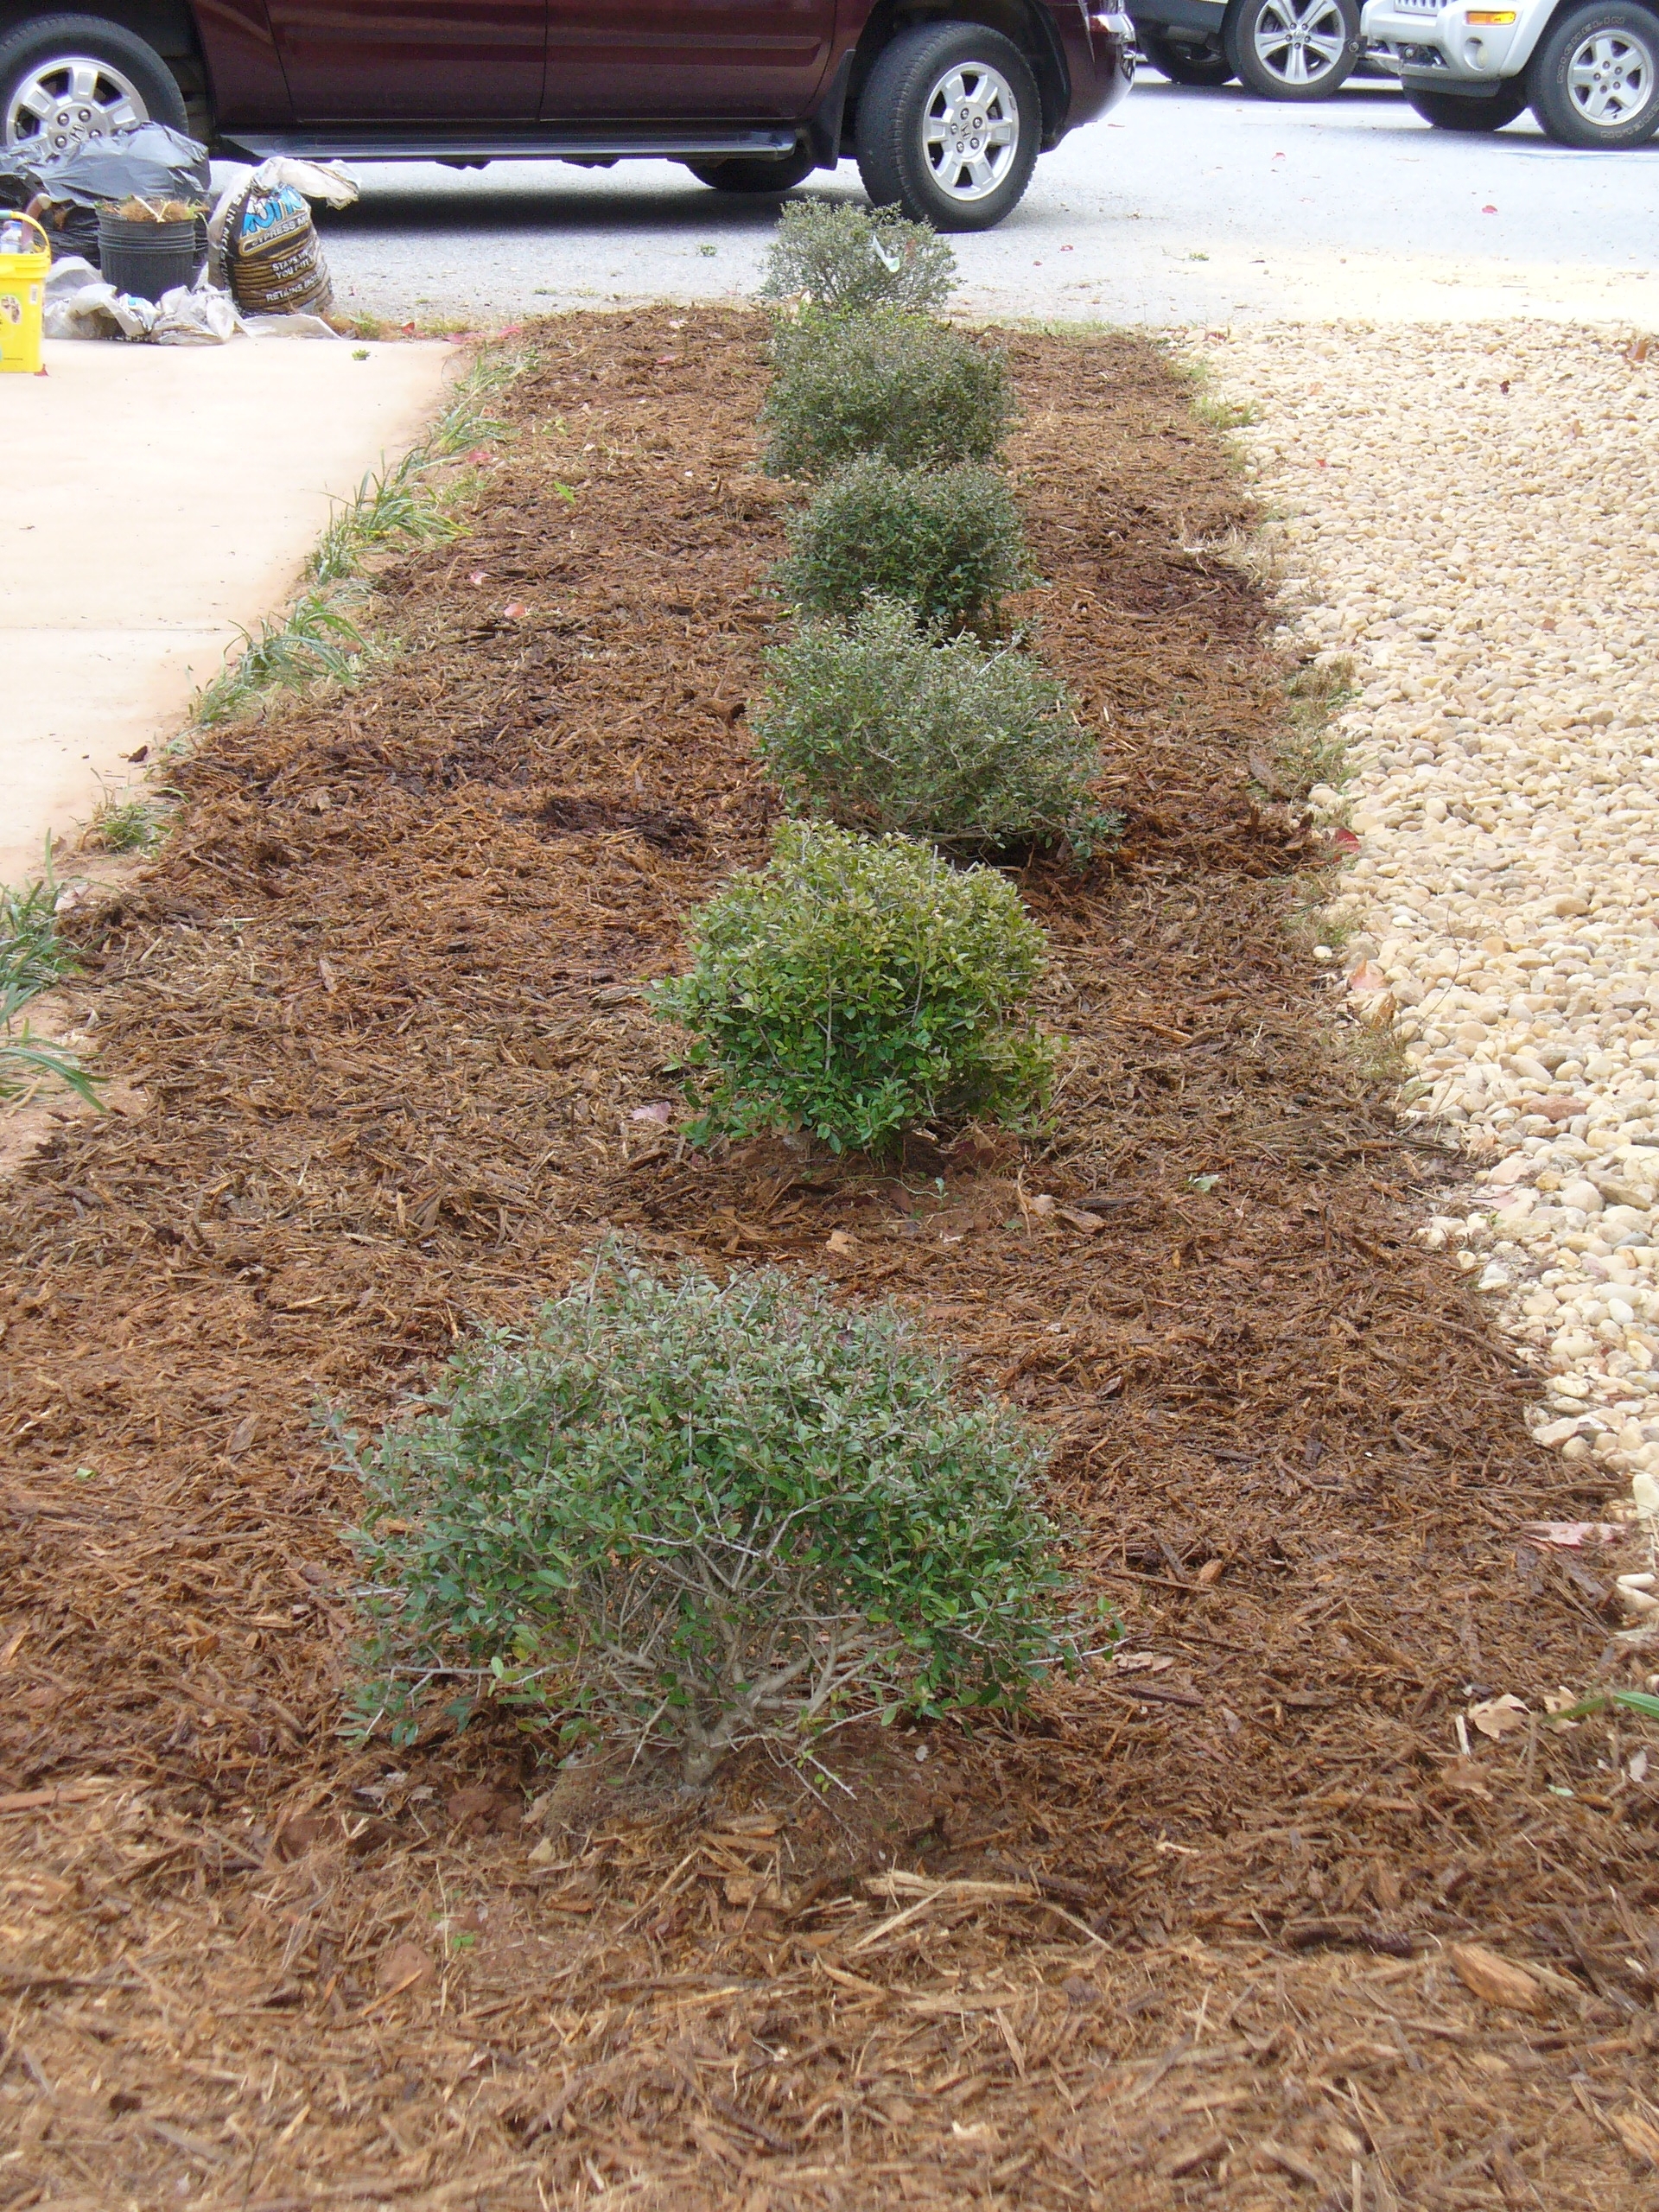 Row of newly planted bushes